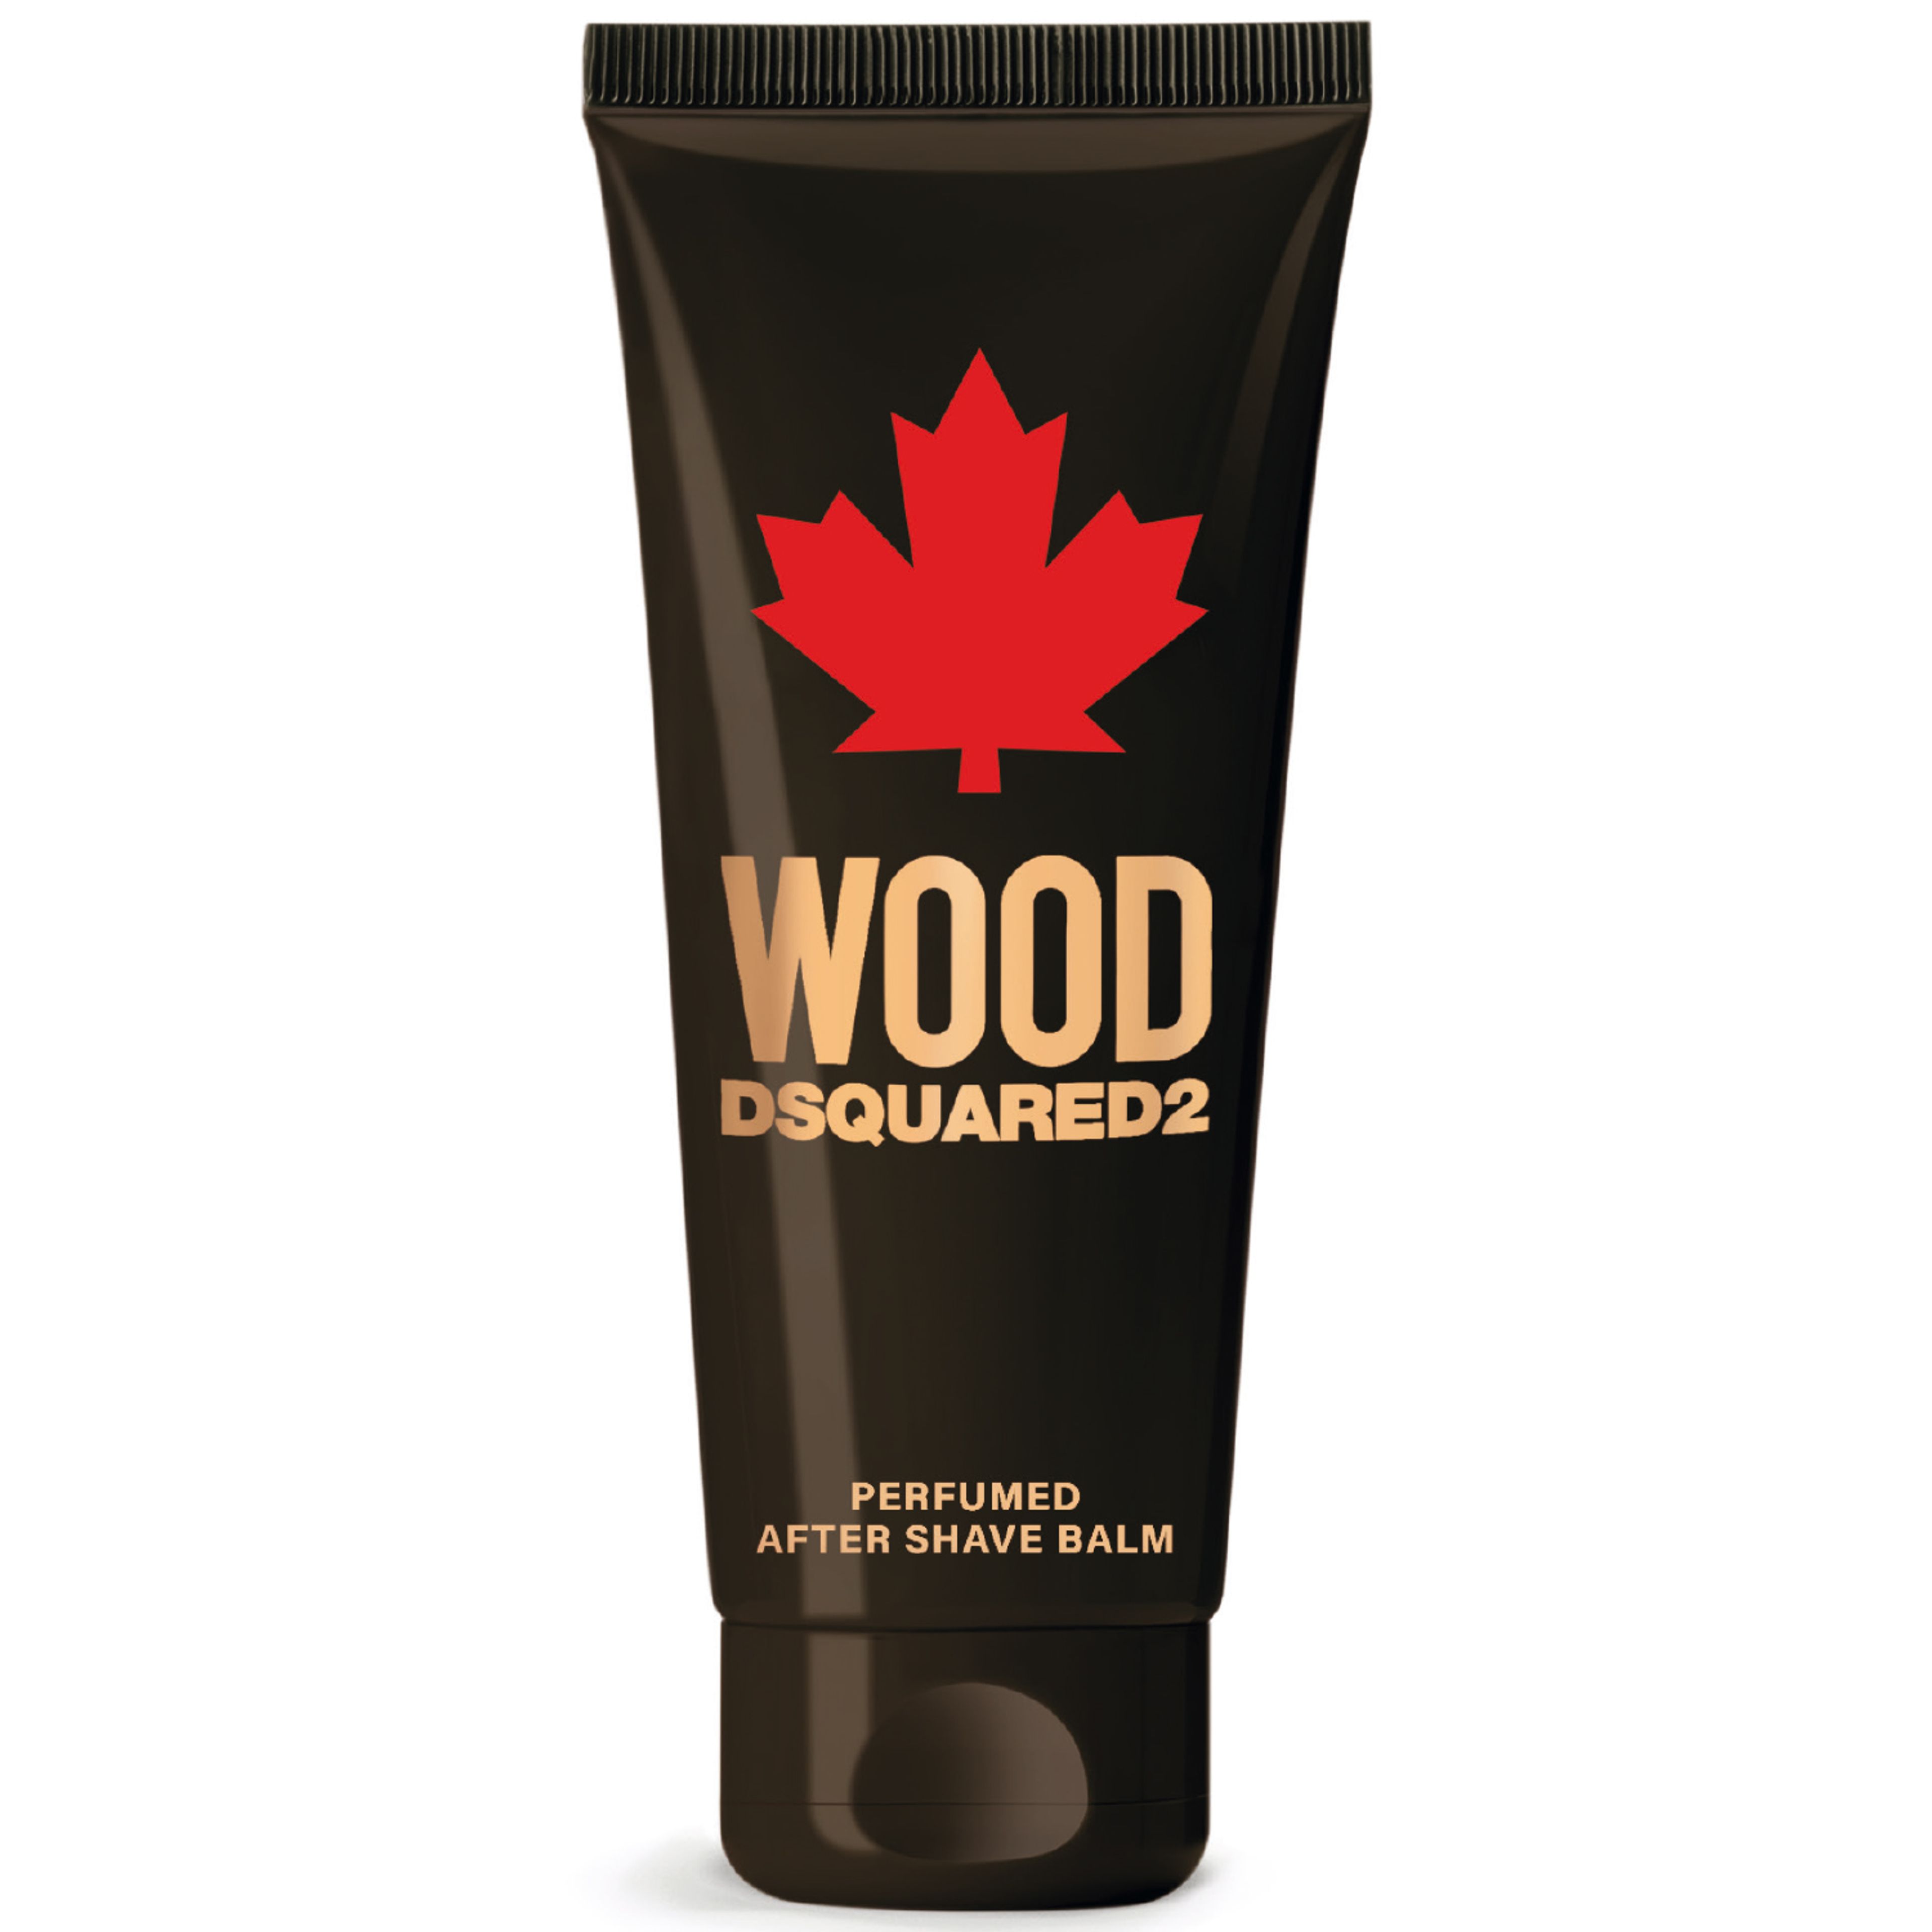 Dsquared2 Wood Pour Homme Perfumed After Shave Balm 1